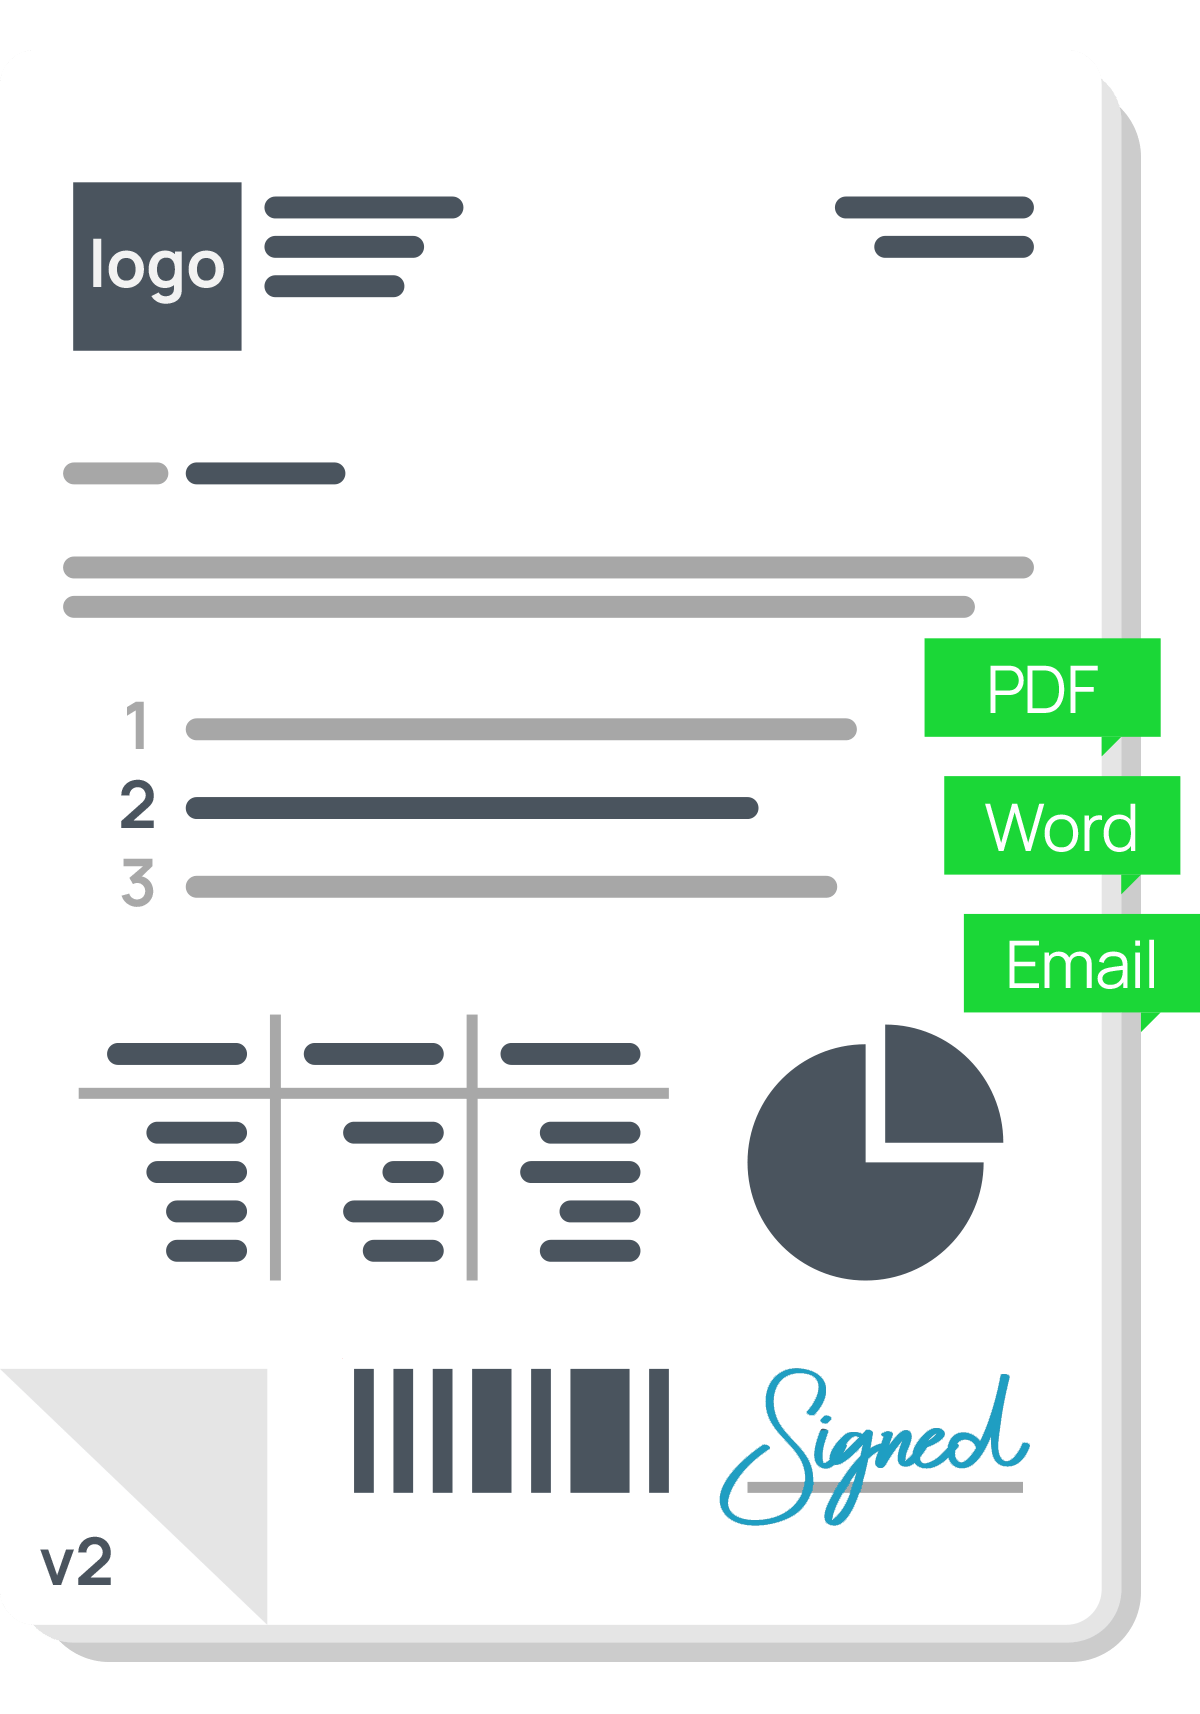 A document template together with the document formats it can be saved as